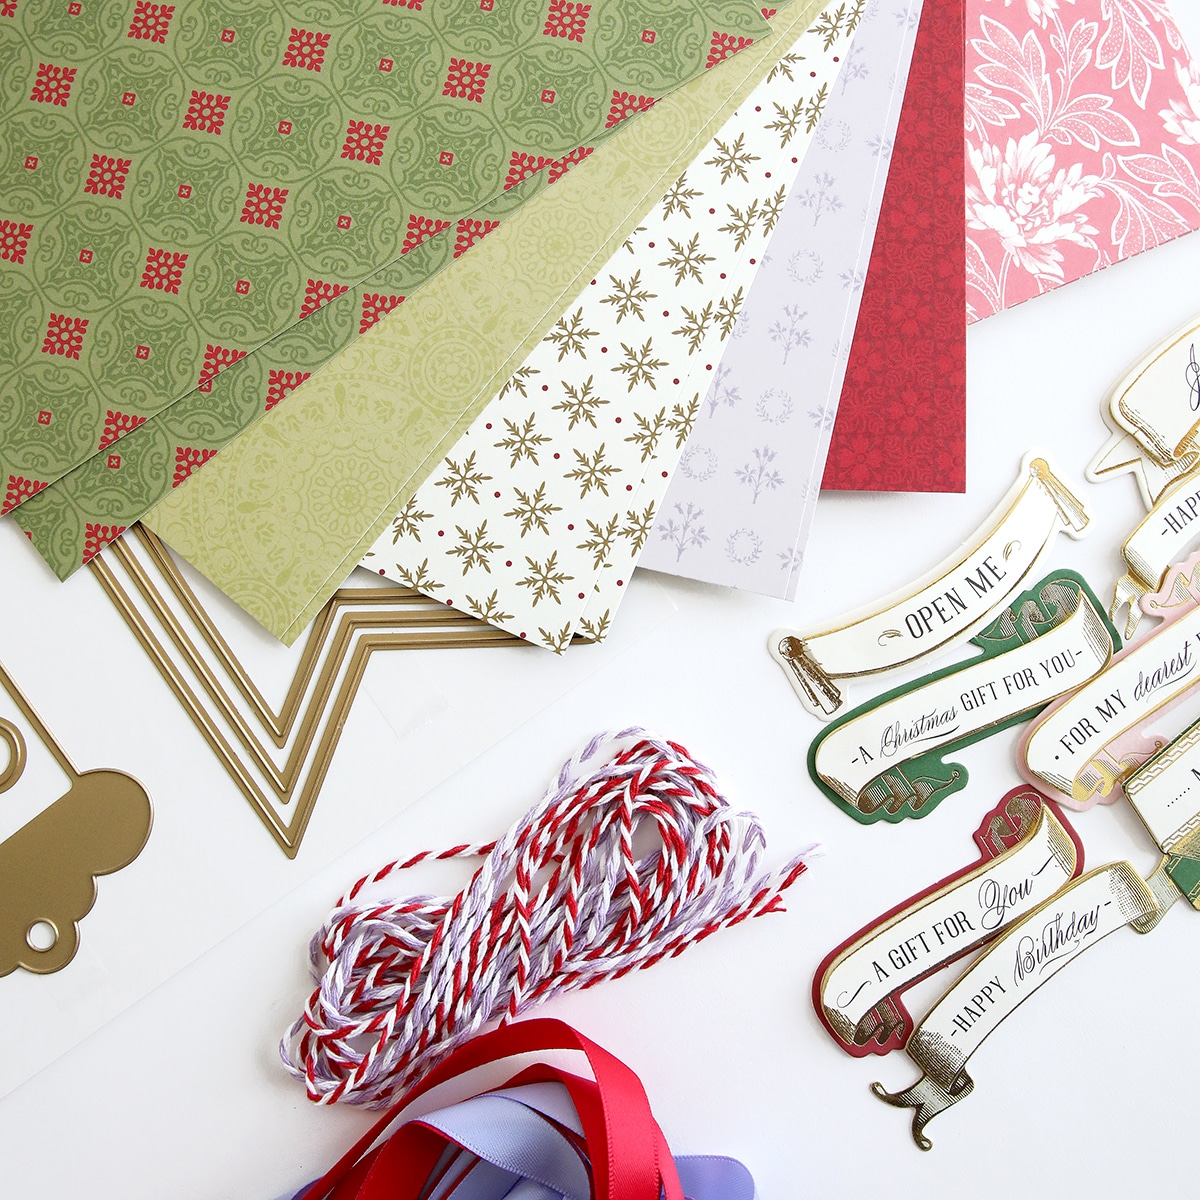 A variety of christmas papers and ribbons are laid out on a table.